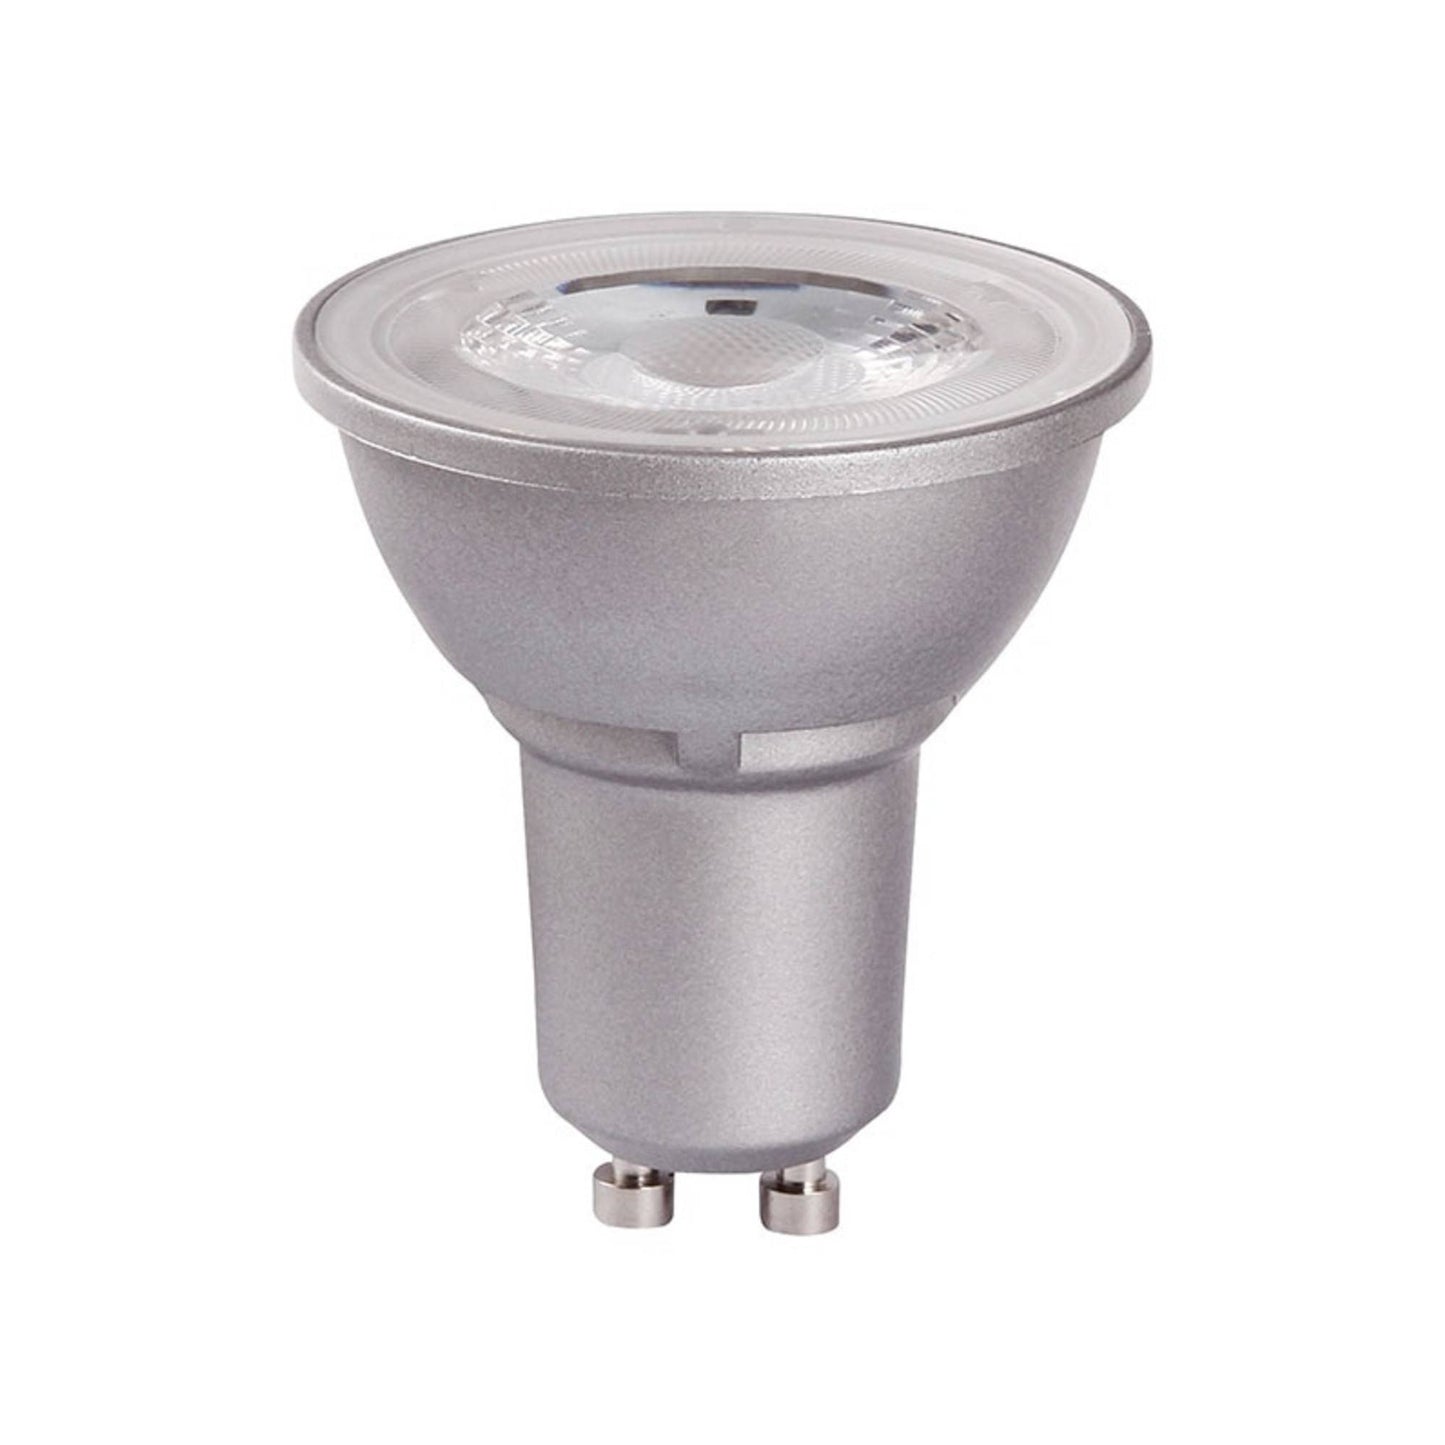 LED GU10 5w Warm White Dimmable